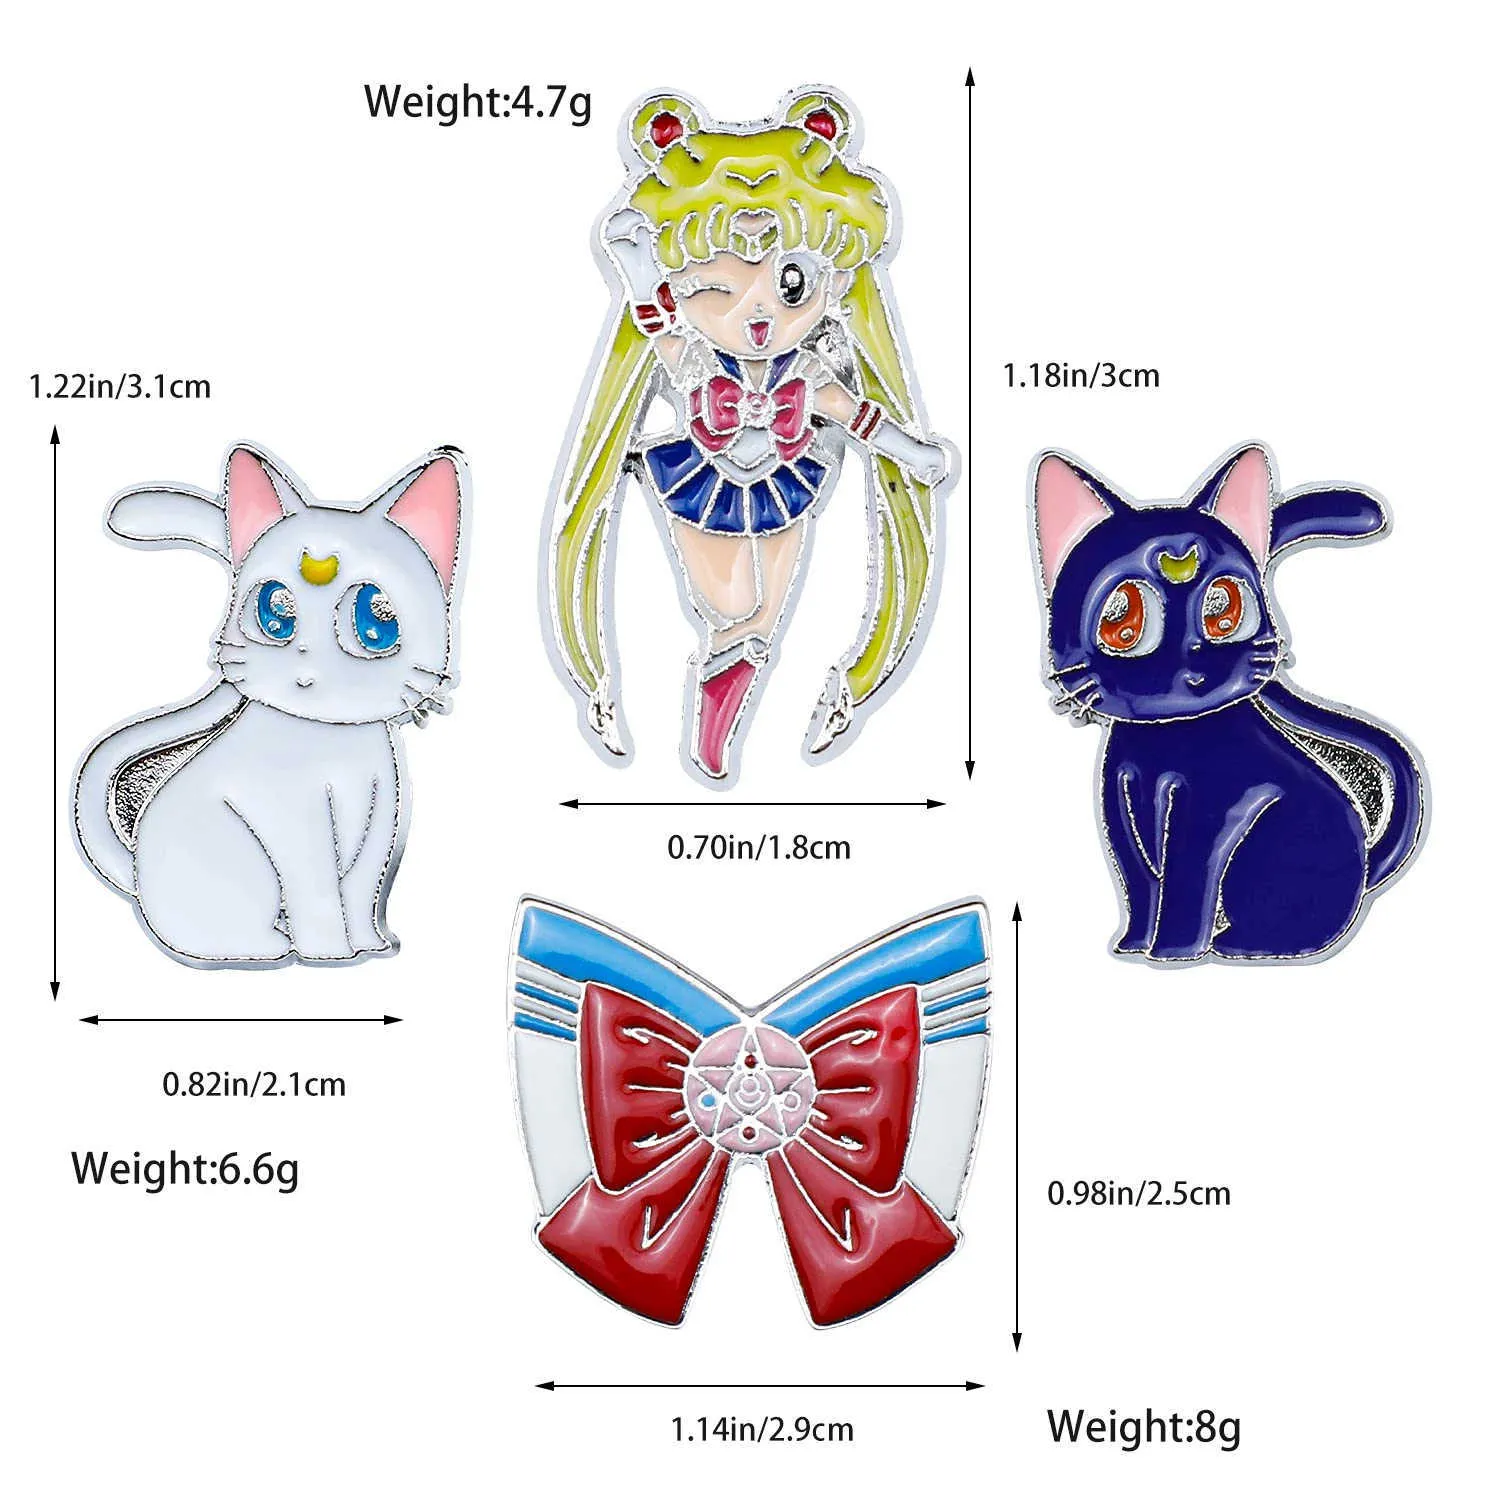 Harong Sailor Moon Enamel Brooch Set Includes Sailor Suit Bow From